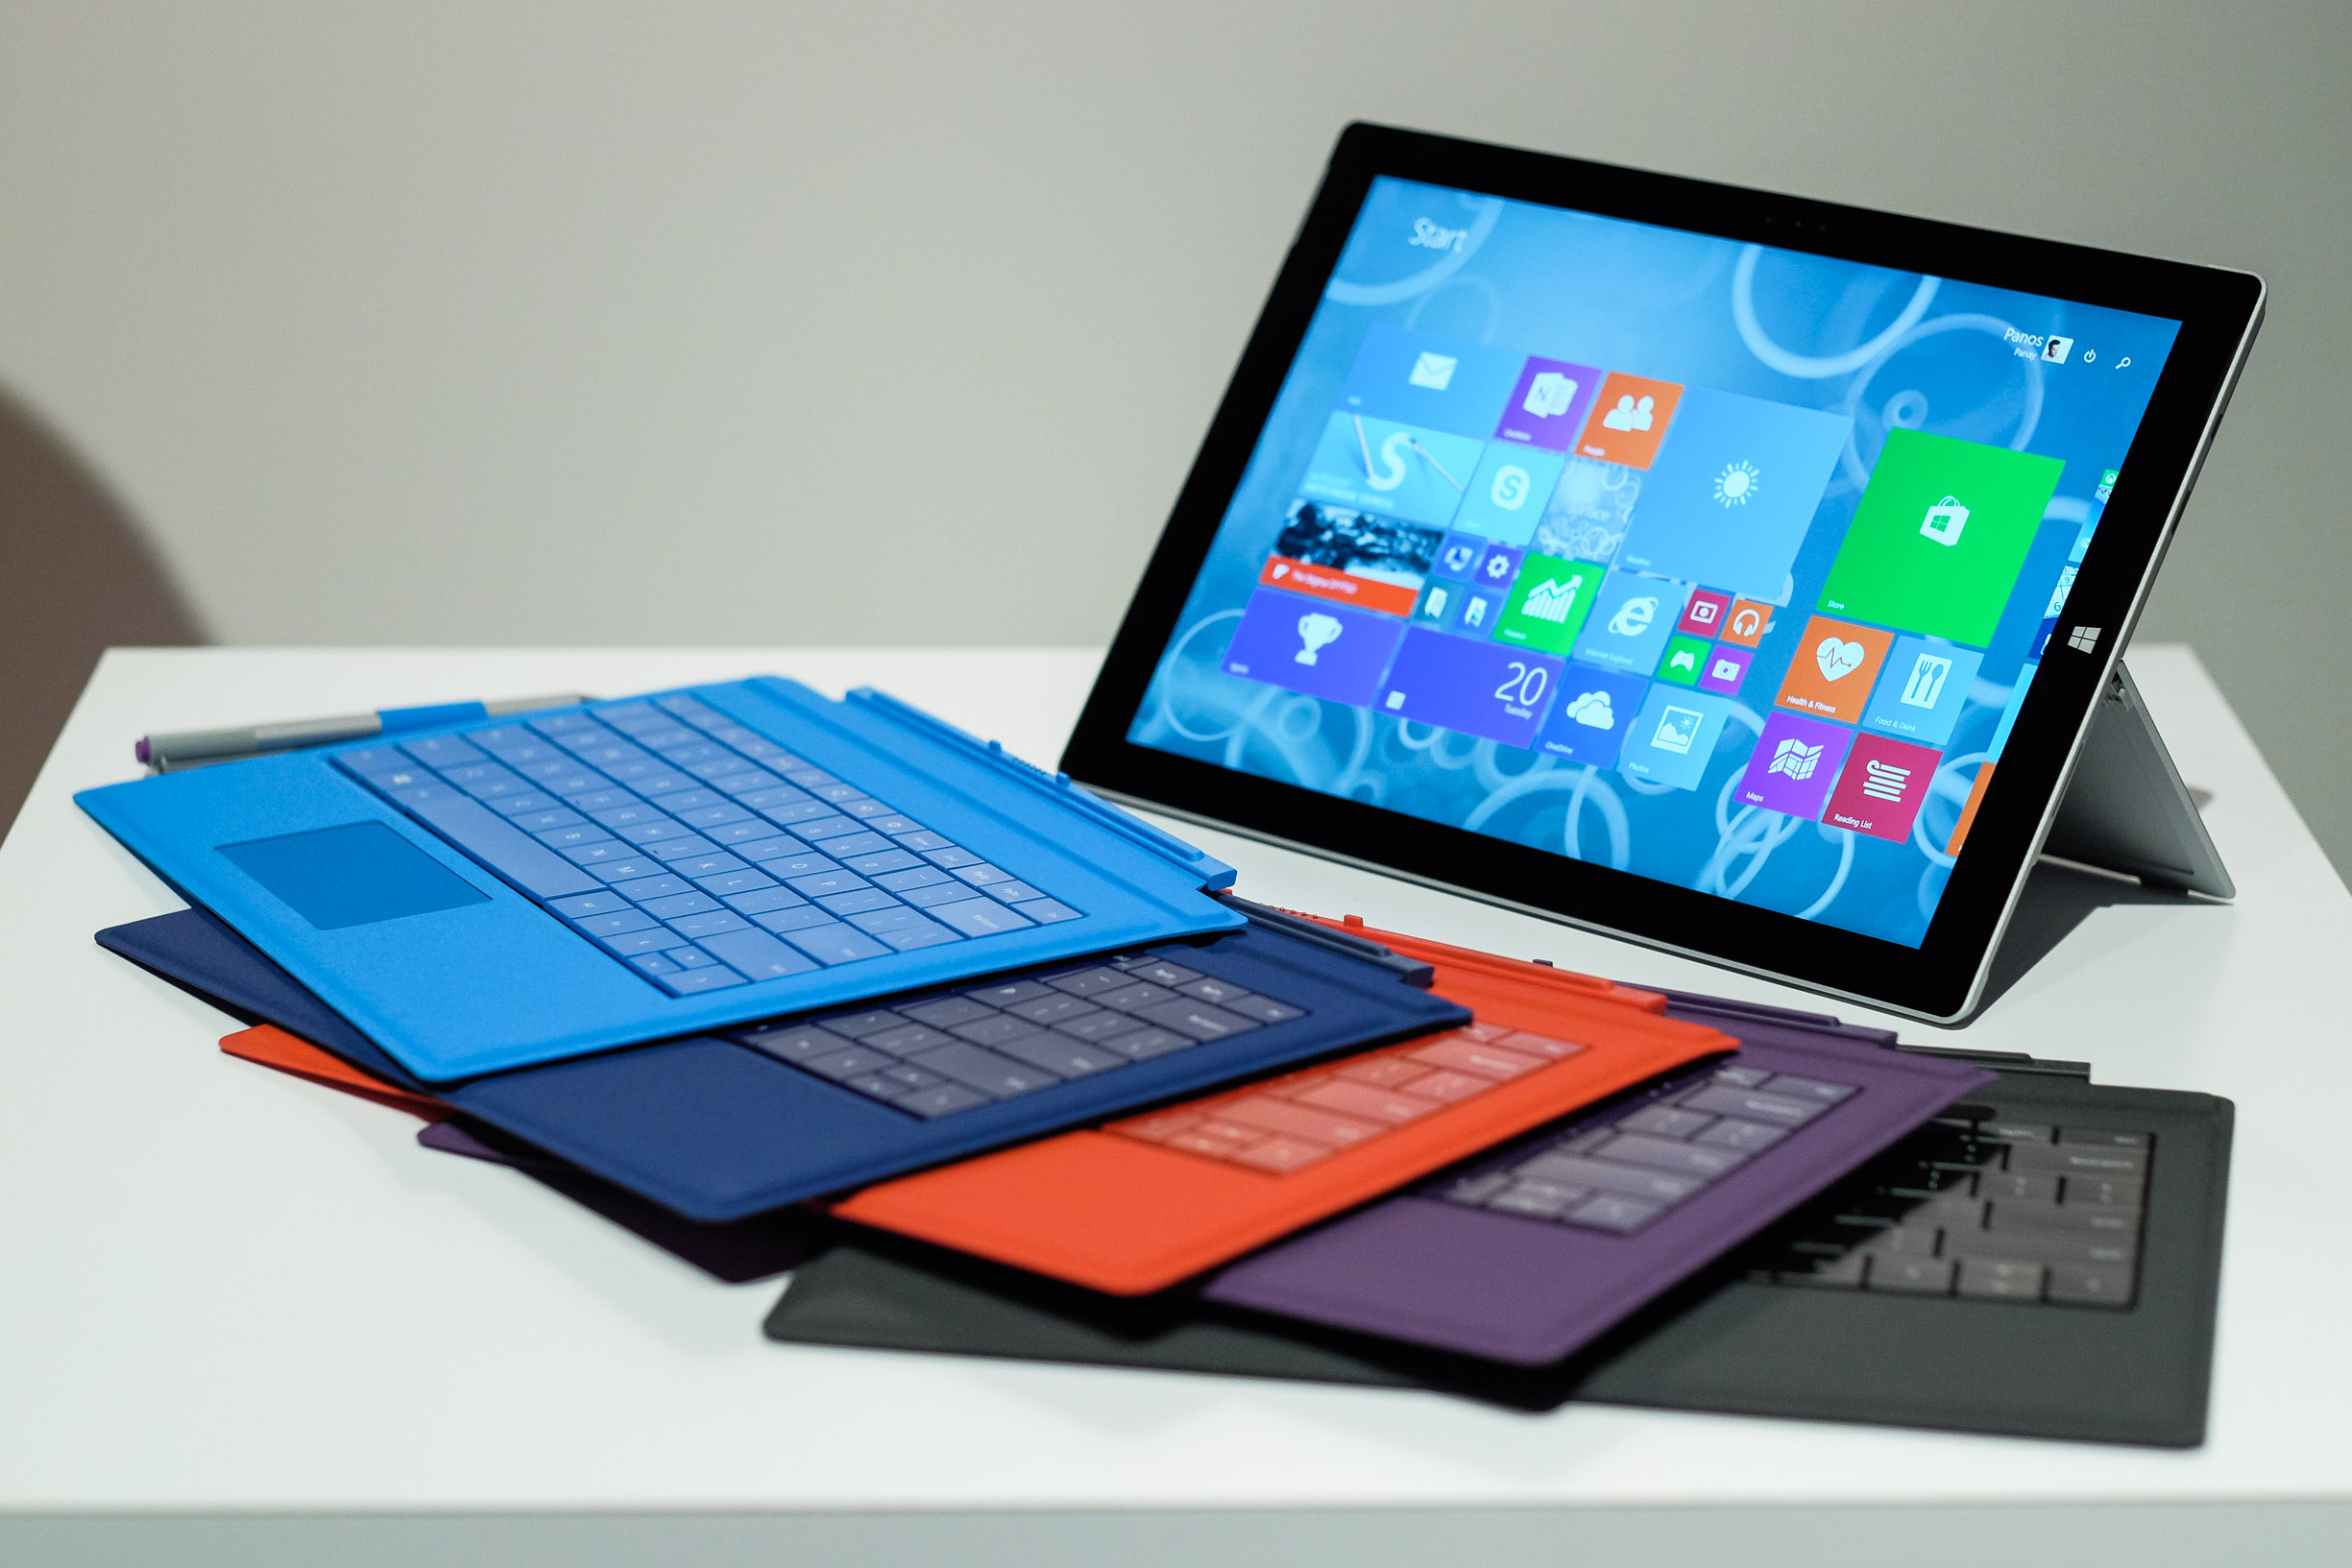 Microsoft Surface Pro 3 Hands-On: Third Times Almost the Charm